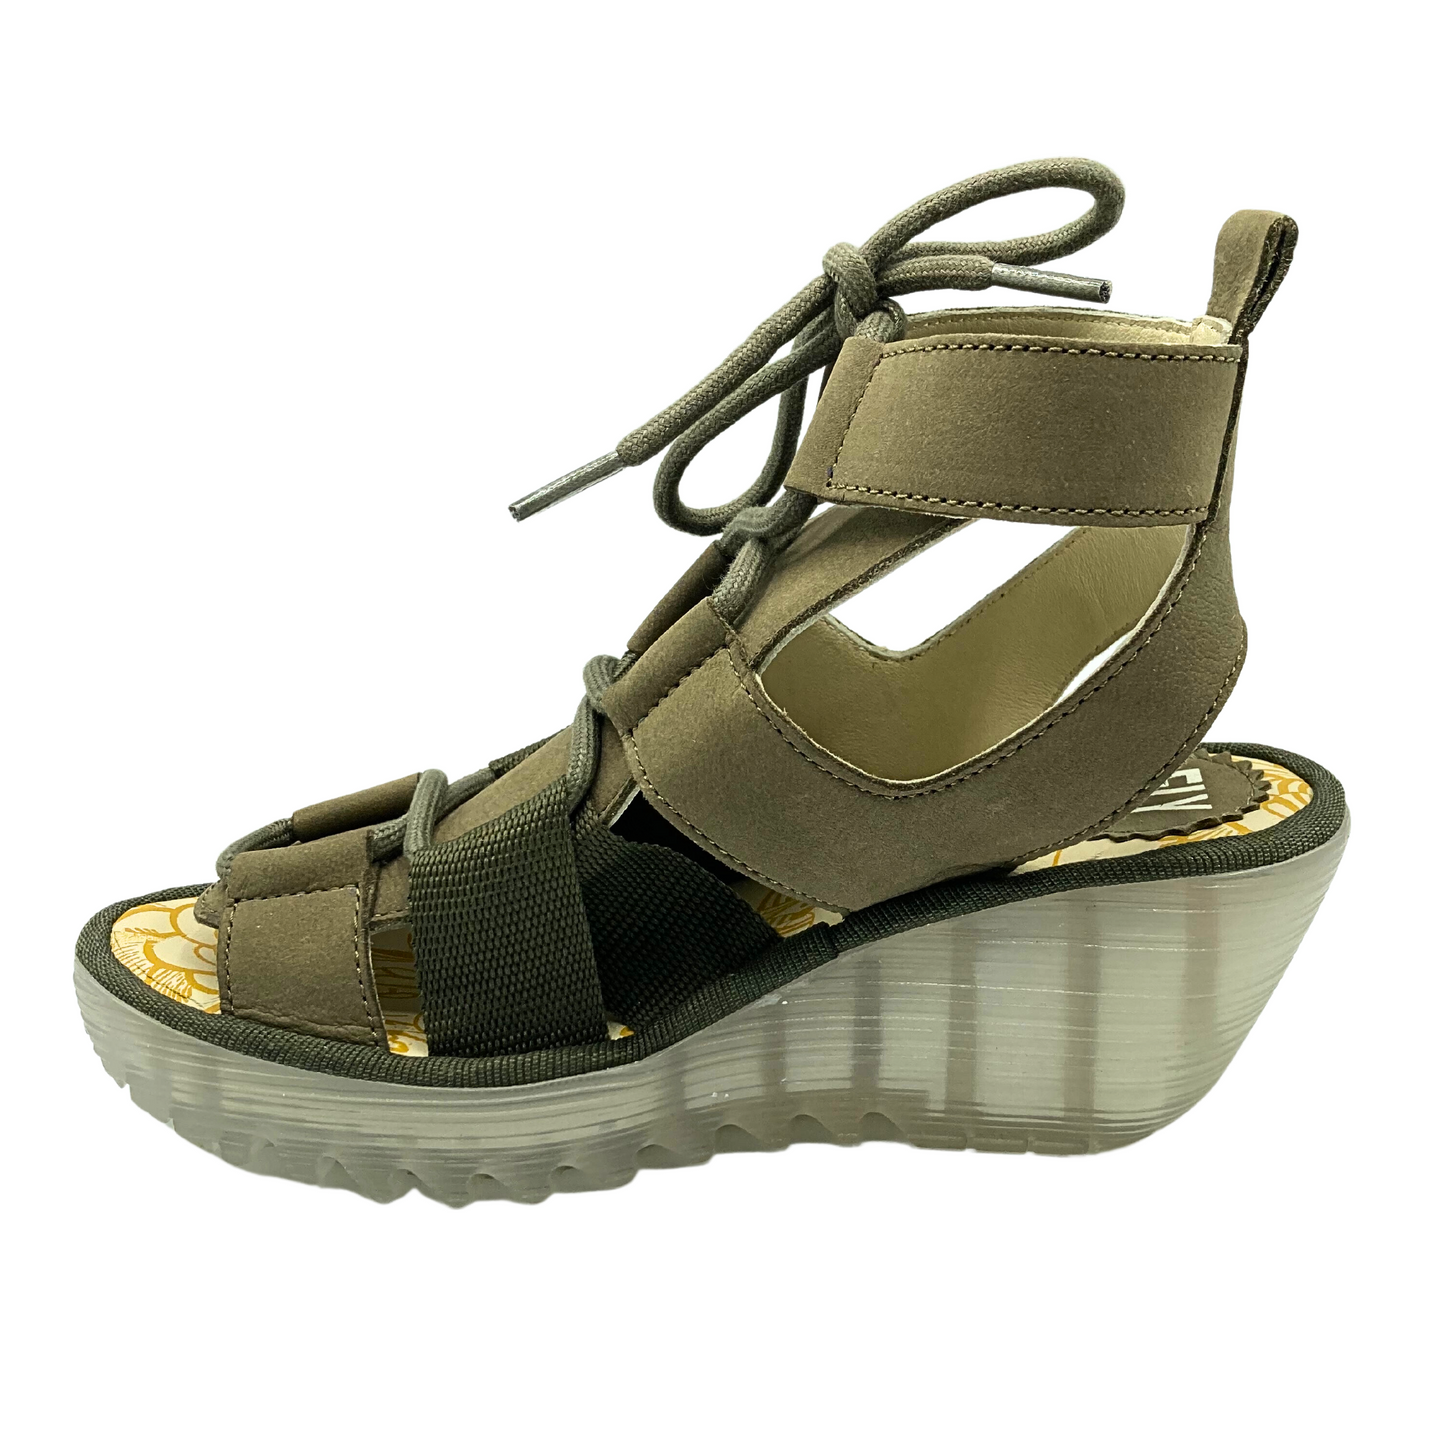 Inside view of Gladiator style sandal by Fly London called Yaca.  See through wedge sole, two-tone coloring in taupe/khaki